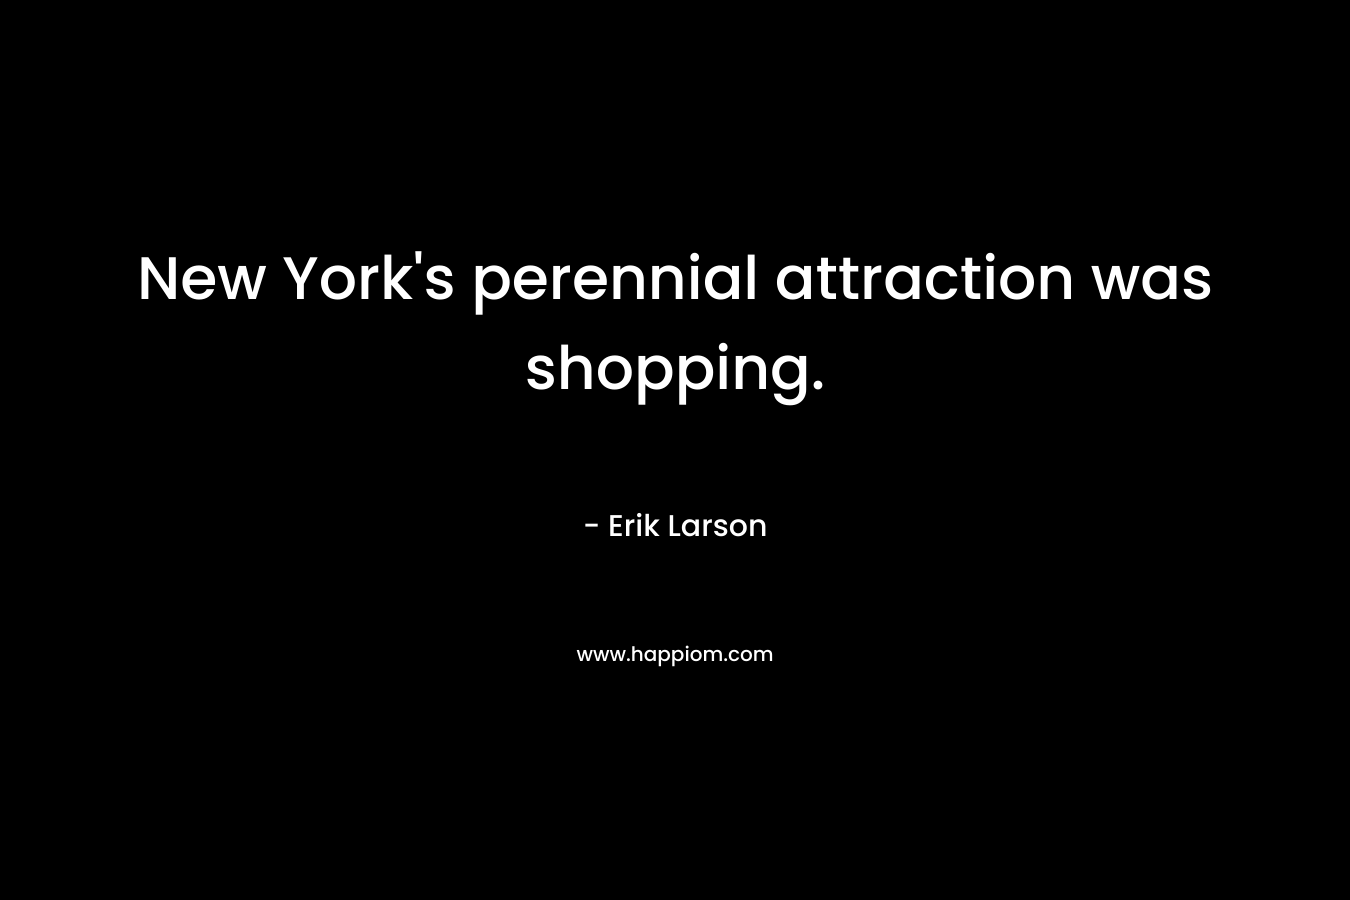 New York's perennial attraction was shopping.